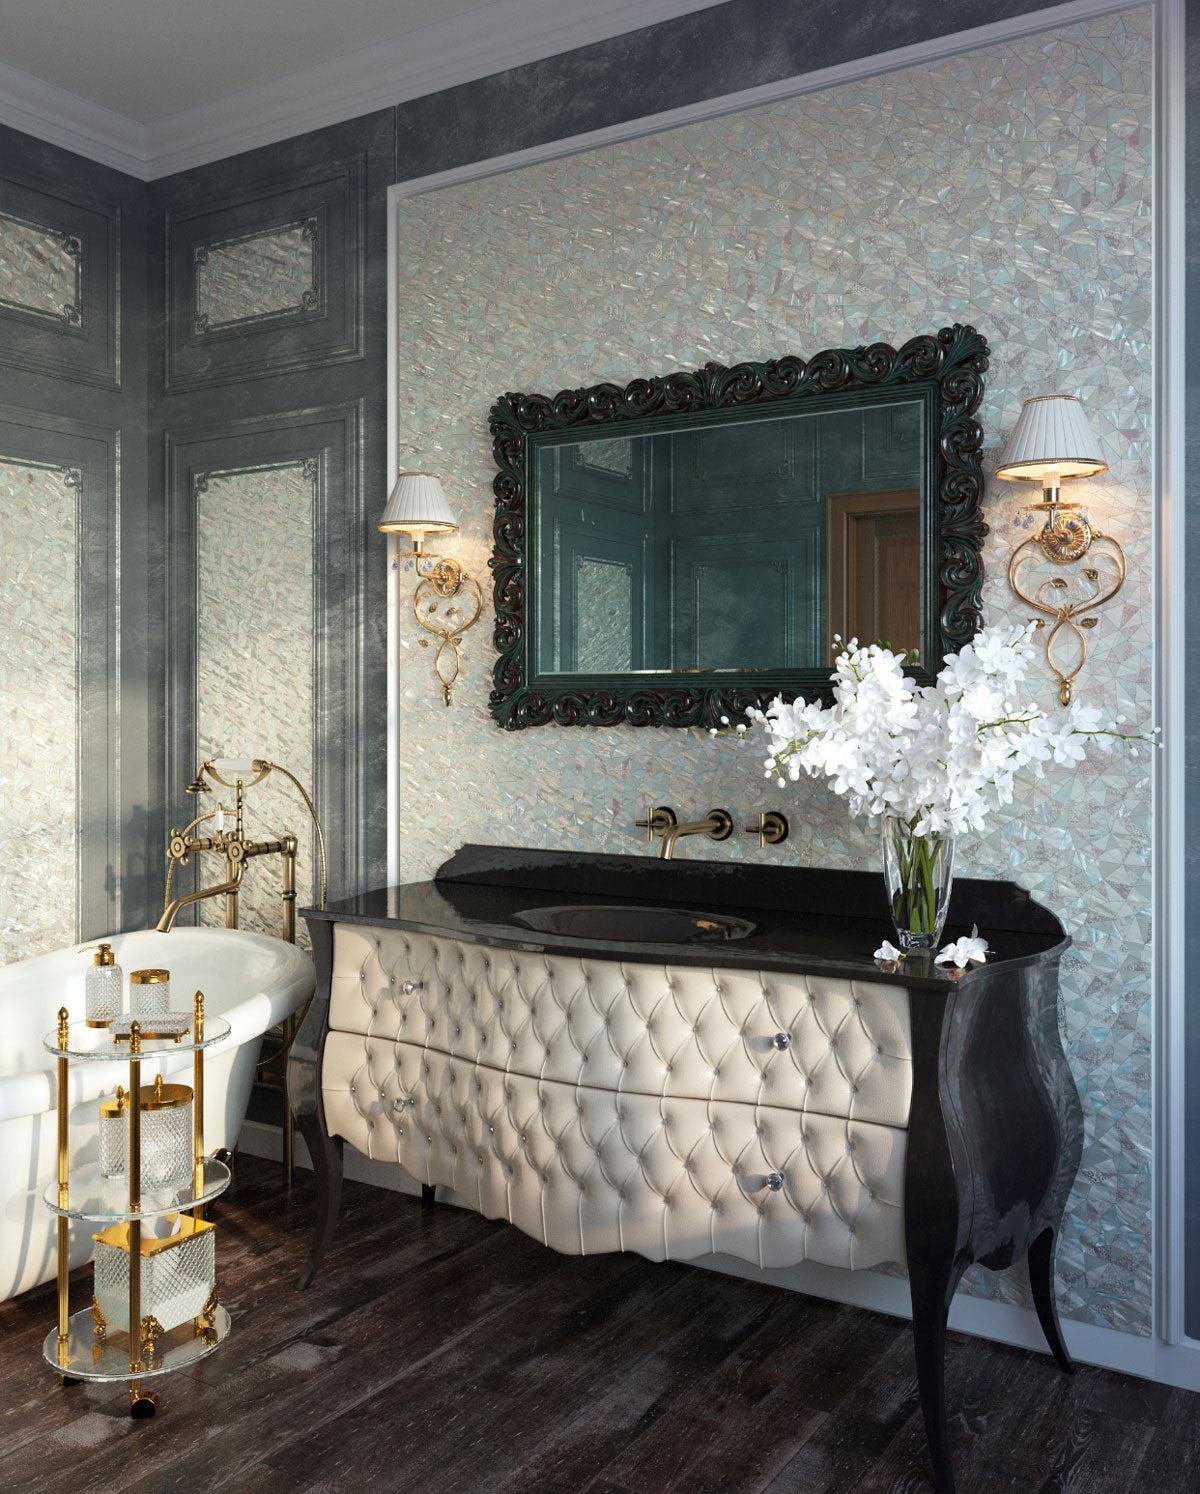 Vintage Bathroom Vanity with Pure White Illusion Mother Of Pearl Mosaic Tile Walls and Bathtub Surround